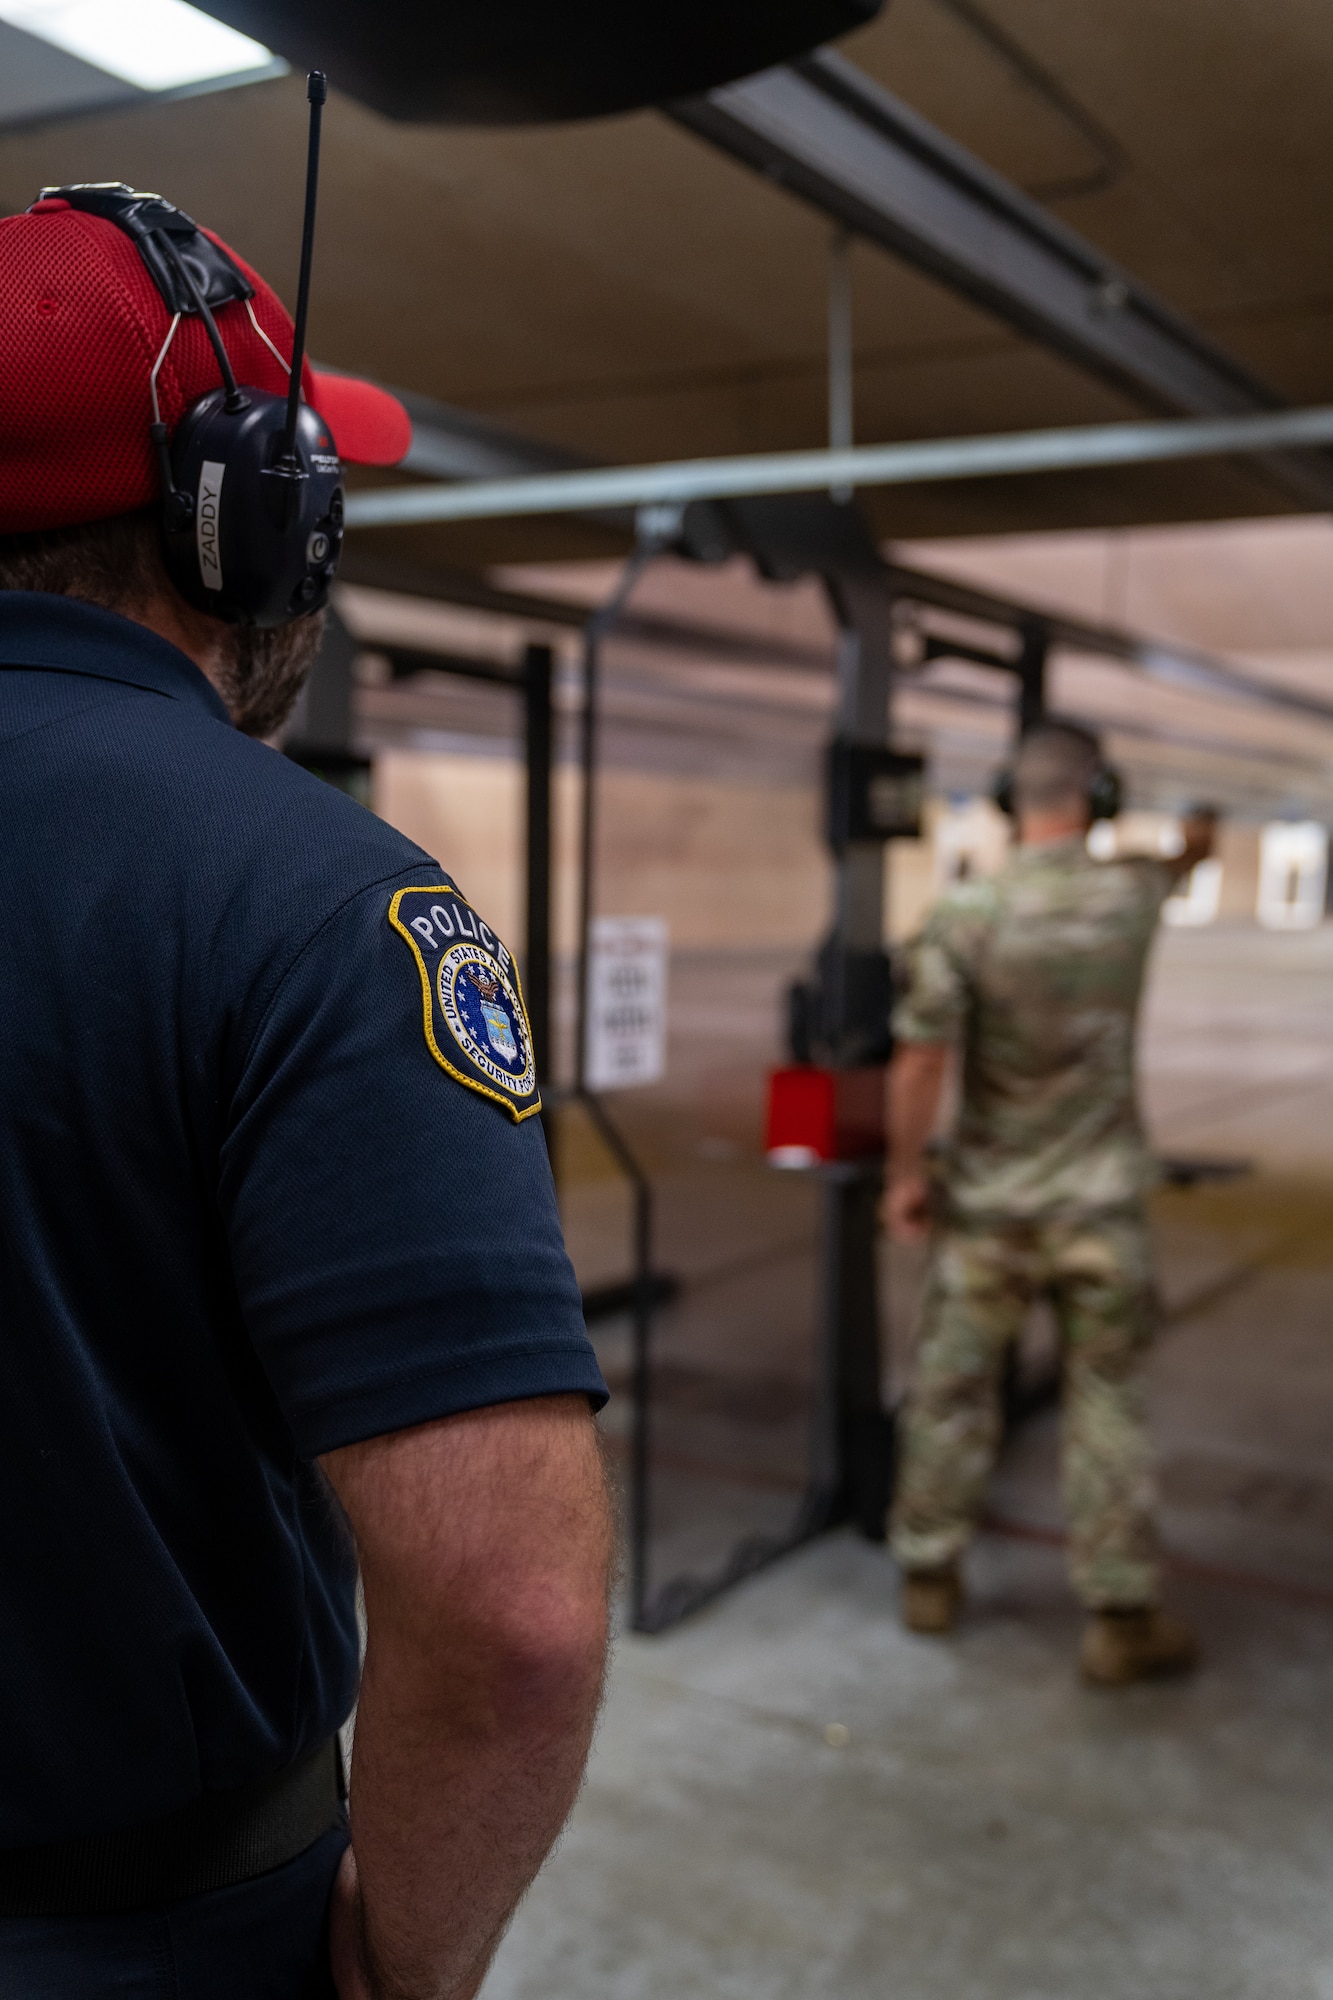 Officer Zach Kaletsch, 81st Security Forces Squadron combat arms instructor, monitors the firing line while U.S. Air Force Staff Sgt. Jesse Wynn, 81st SFS combat arms training and maintenance, fires one handed at his target during the National Police Week pistol competition at Keesler Air Force Base, Mississippi, May 17, 2023.